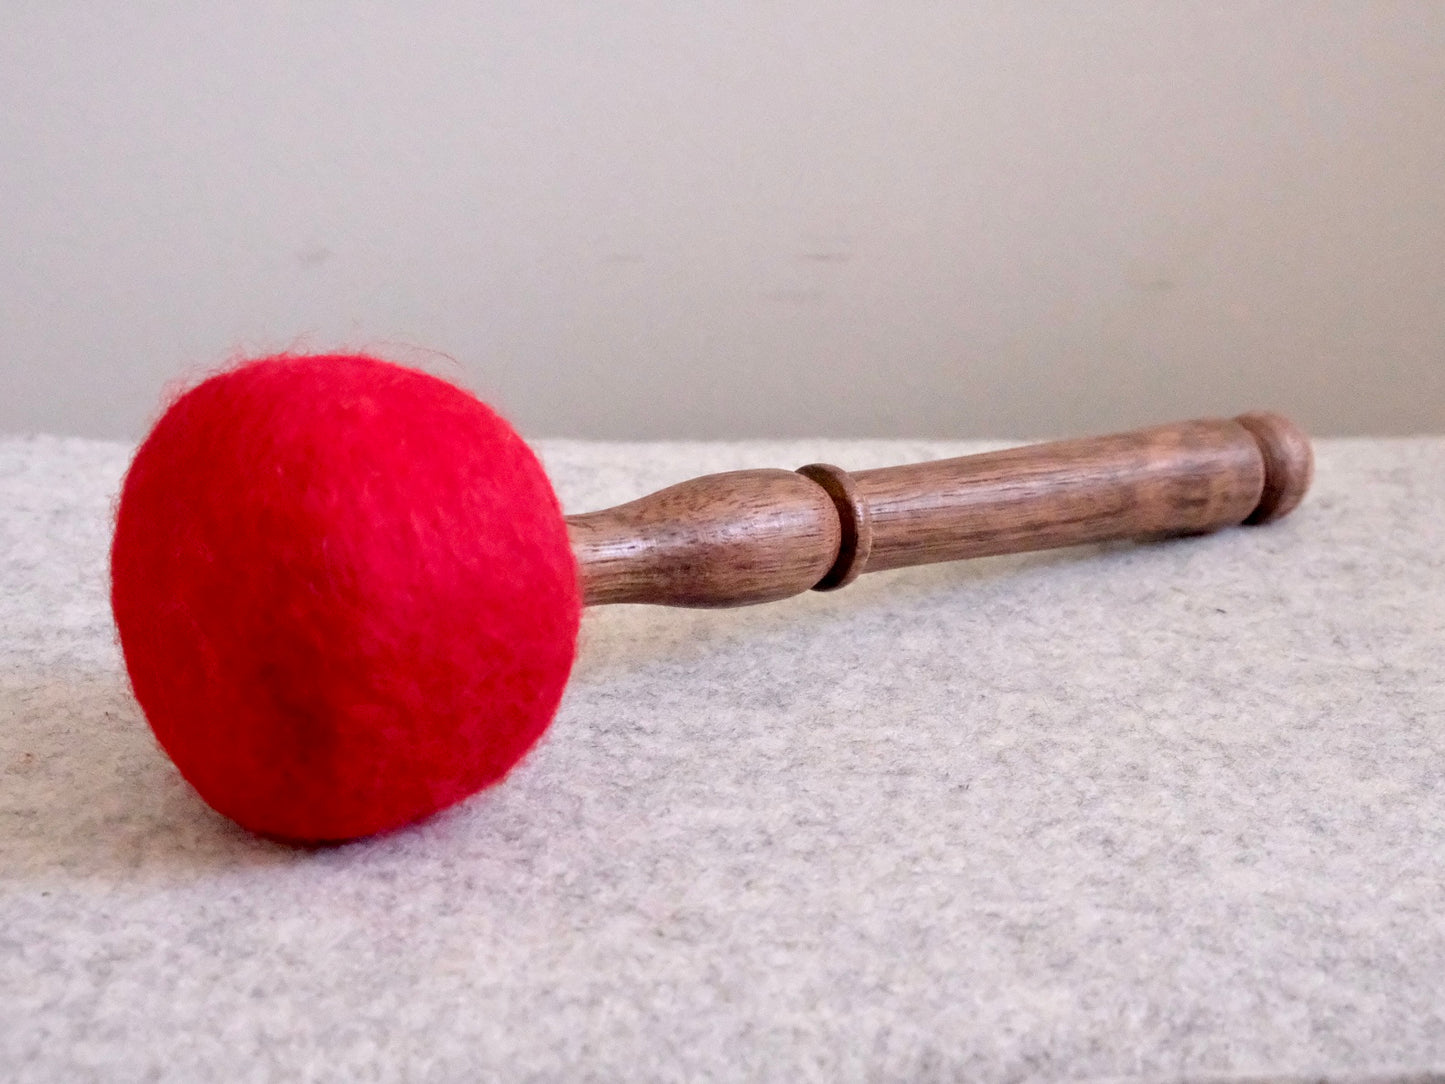 M Ball Mallet - for medium and large bowls